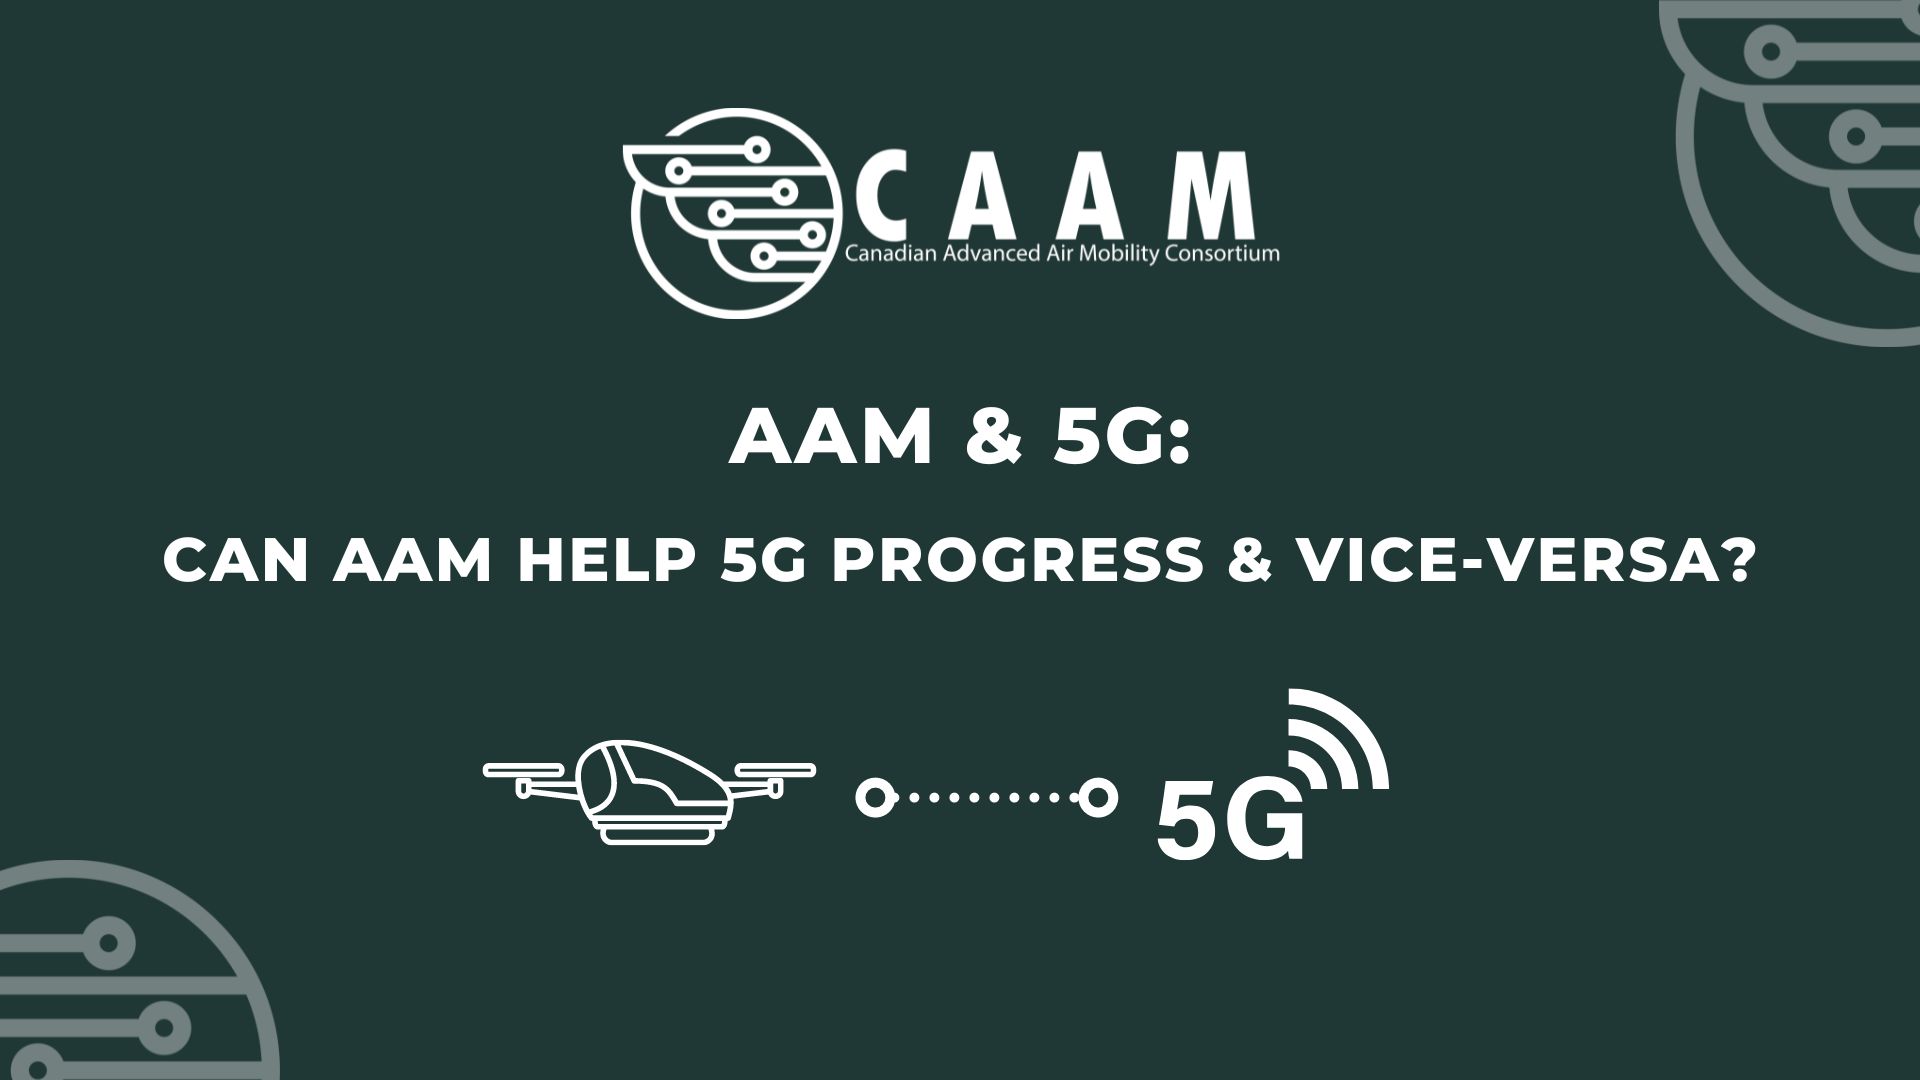 AAM and 5G - Can AAM help 5G progress and vice-versa?